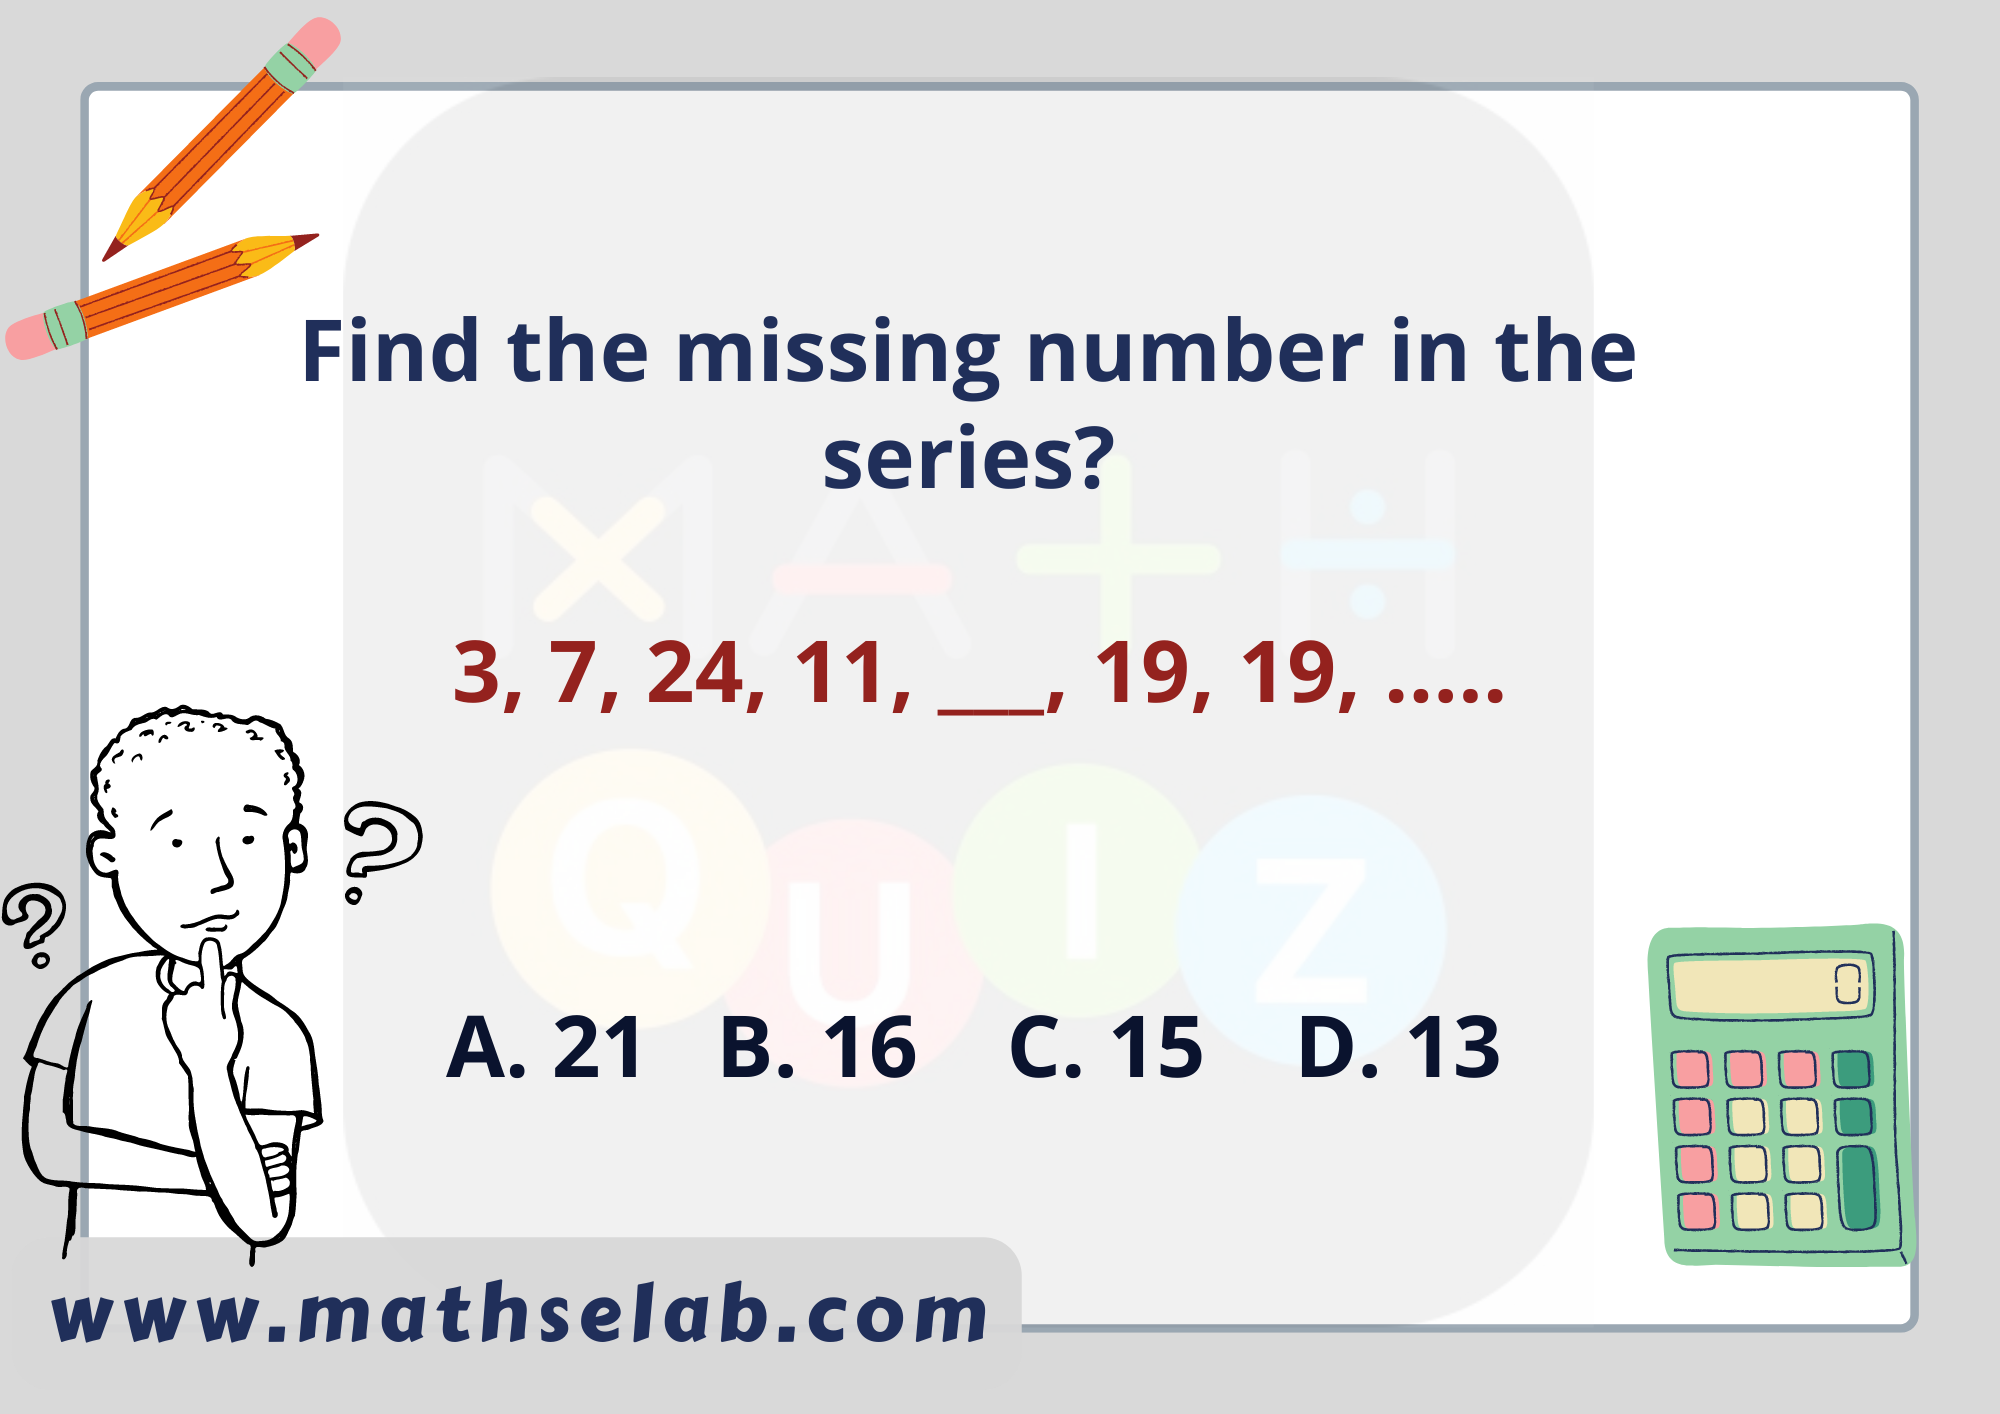 Find the missing number in the series?  3, 7, 24, 11, ___, 19, 19, .....